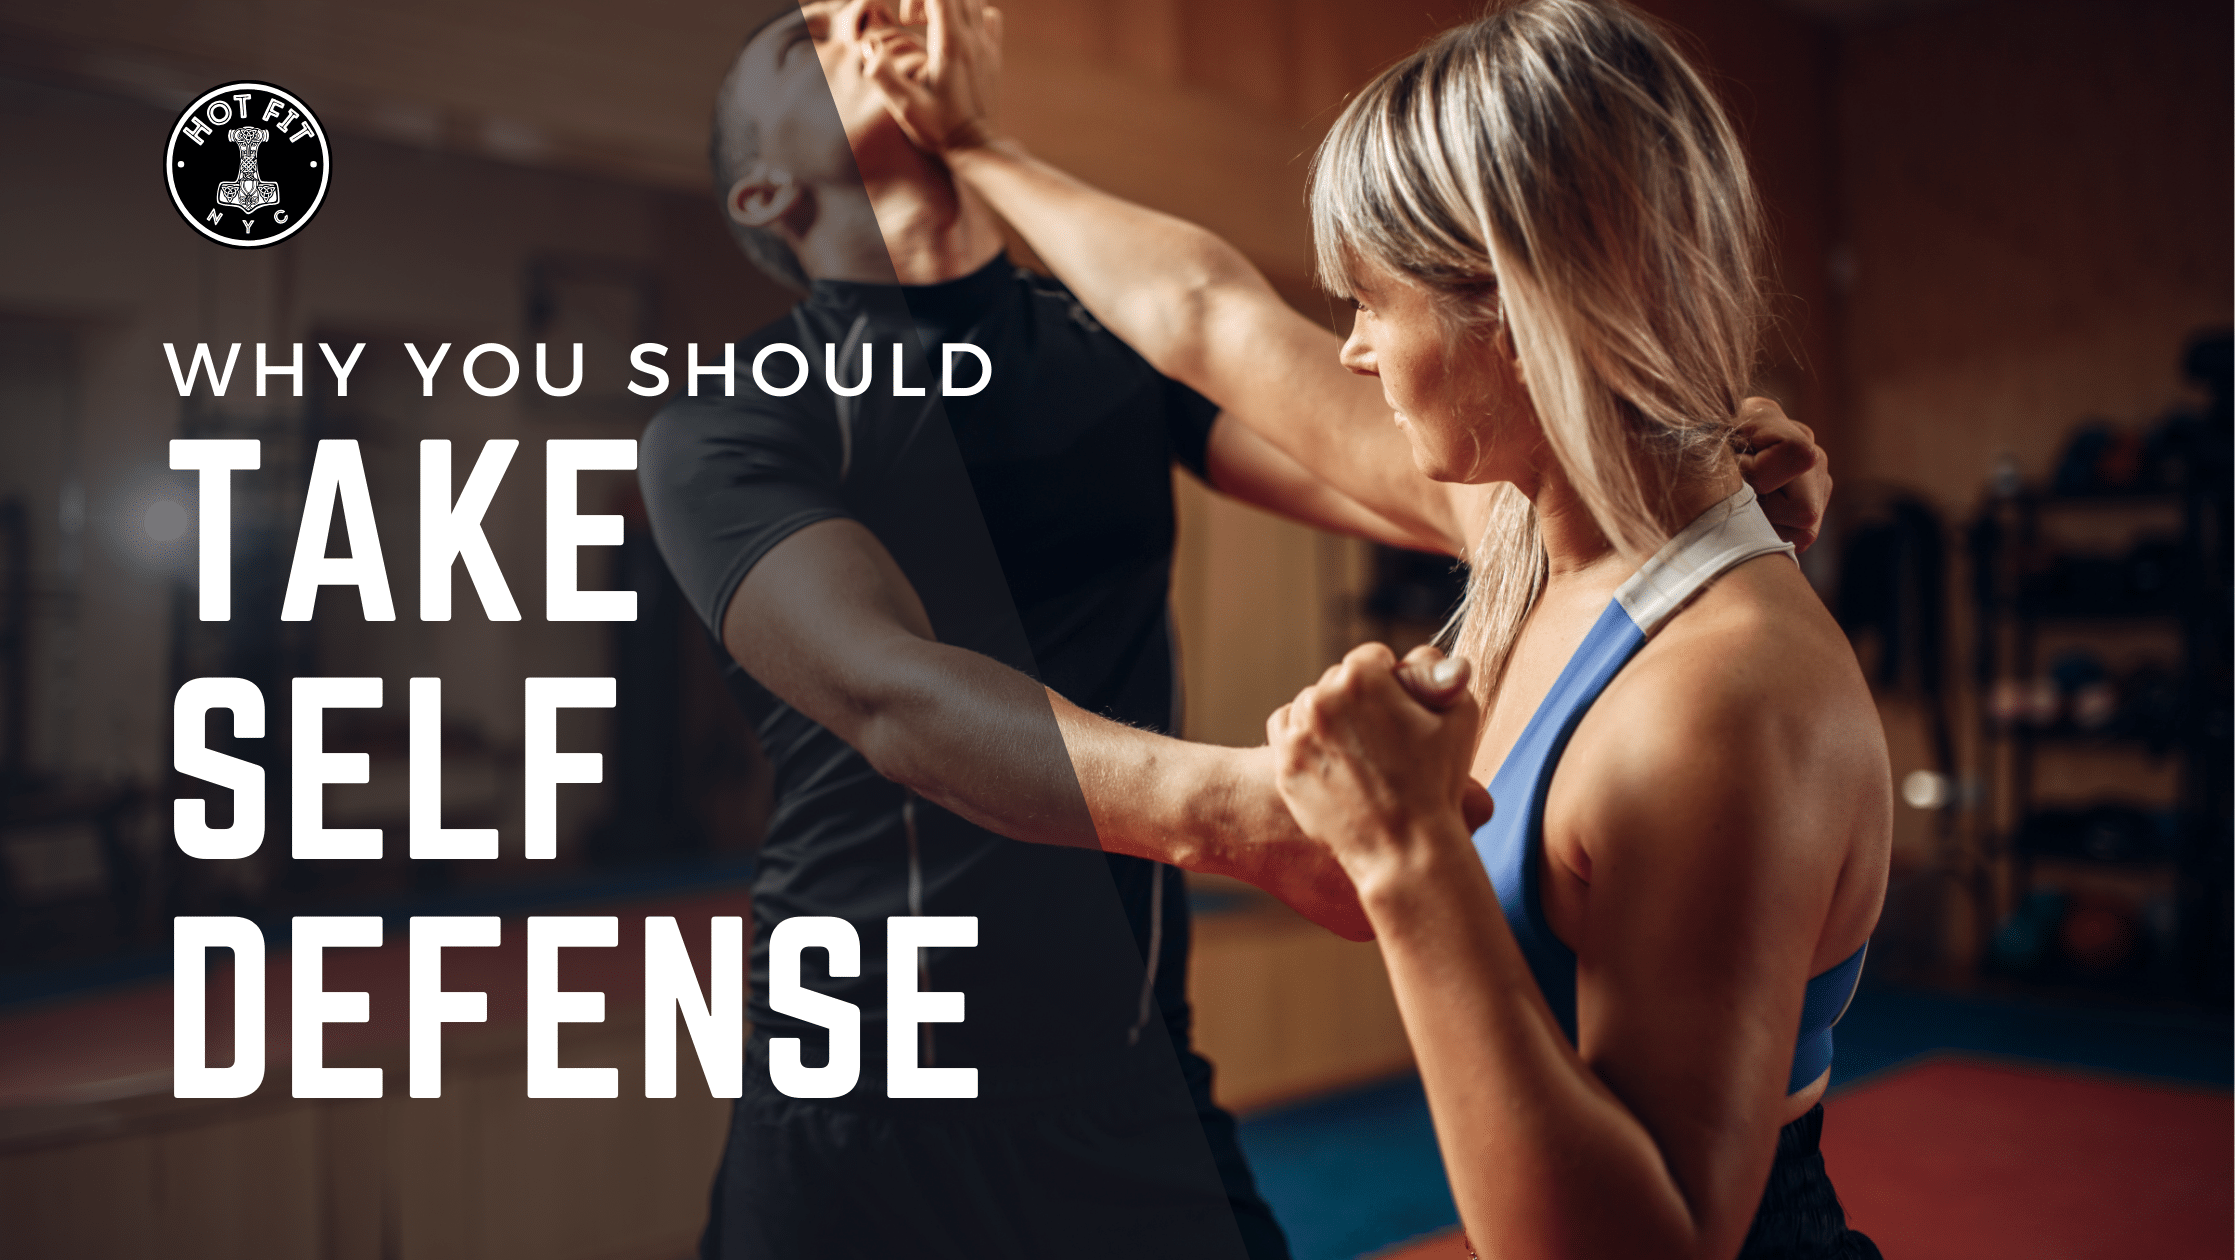 Why Should You Take Self-Defense Course